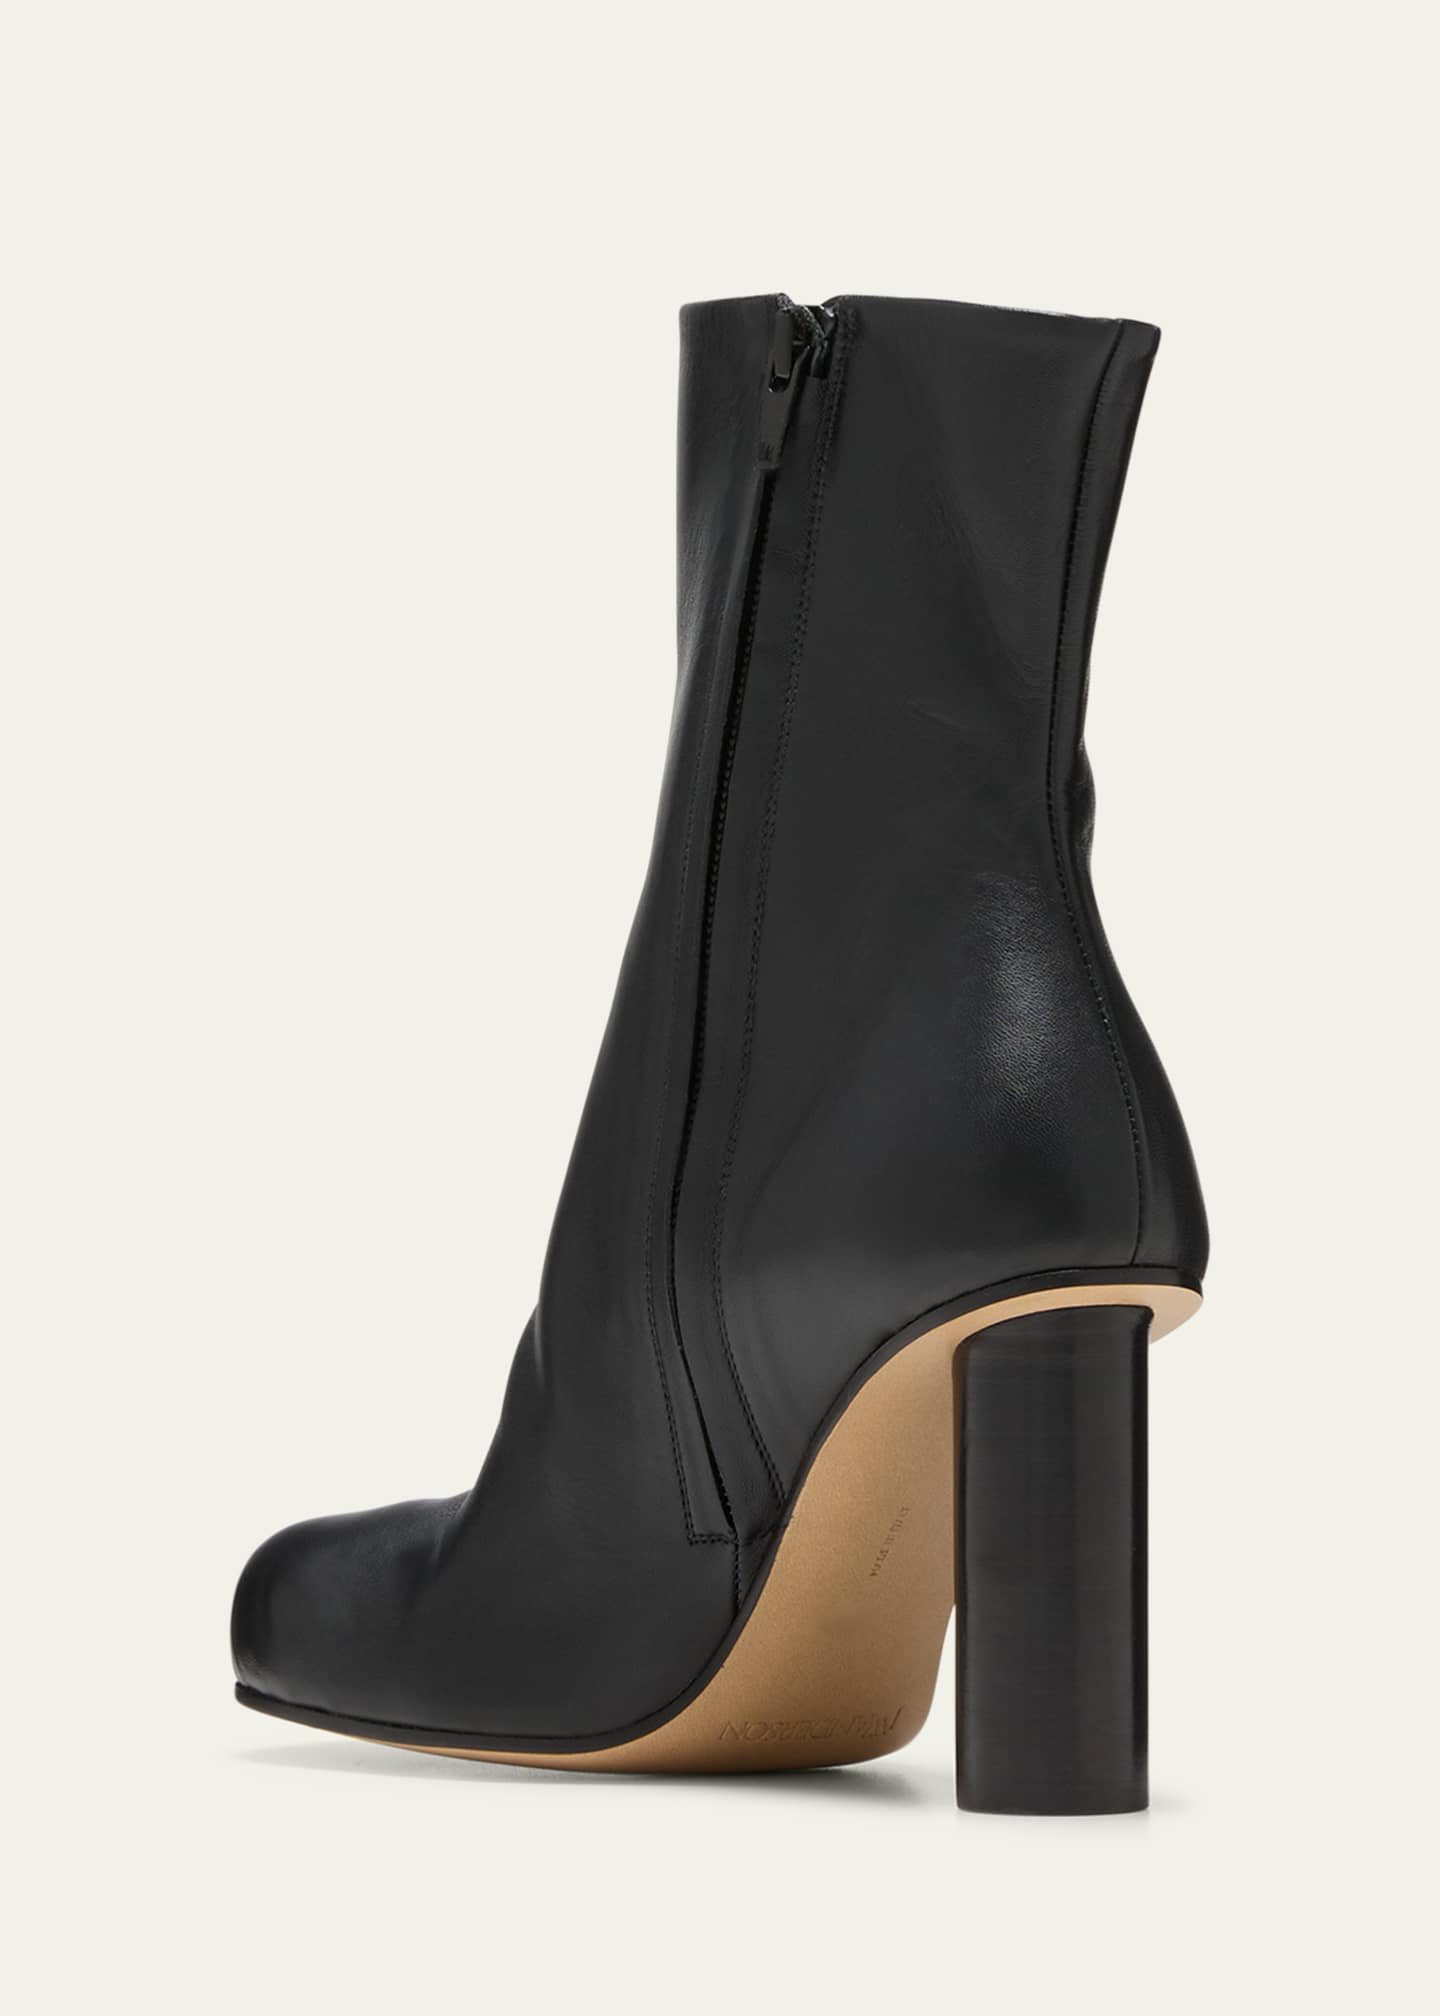 JW Anderson Leather Paw-Toe Ankle Boots - Bergdorf Goodman